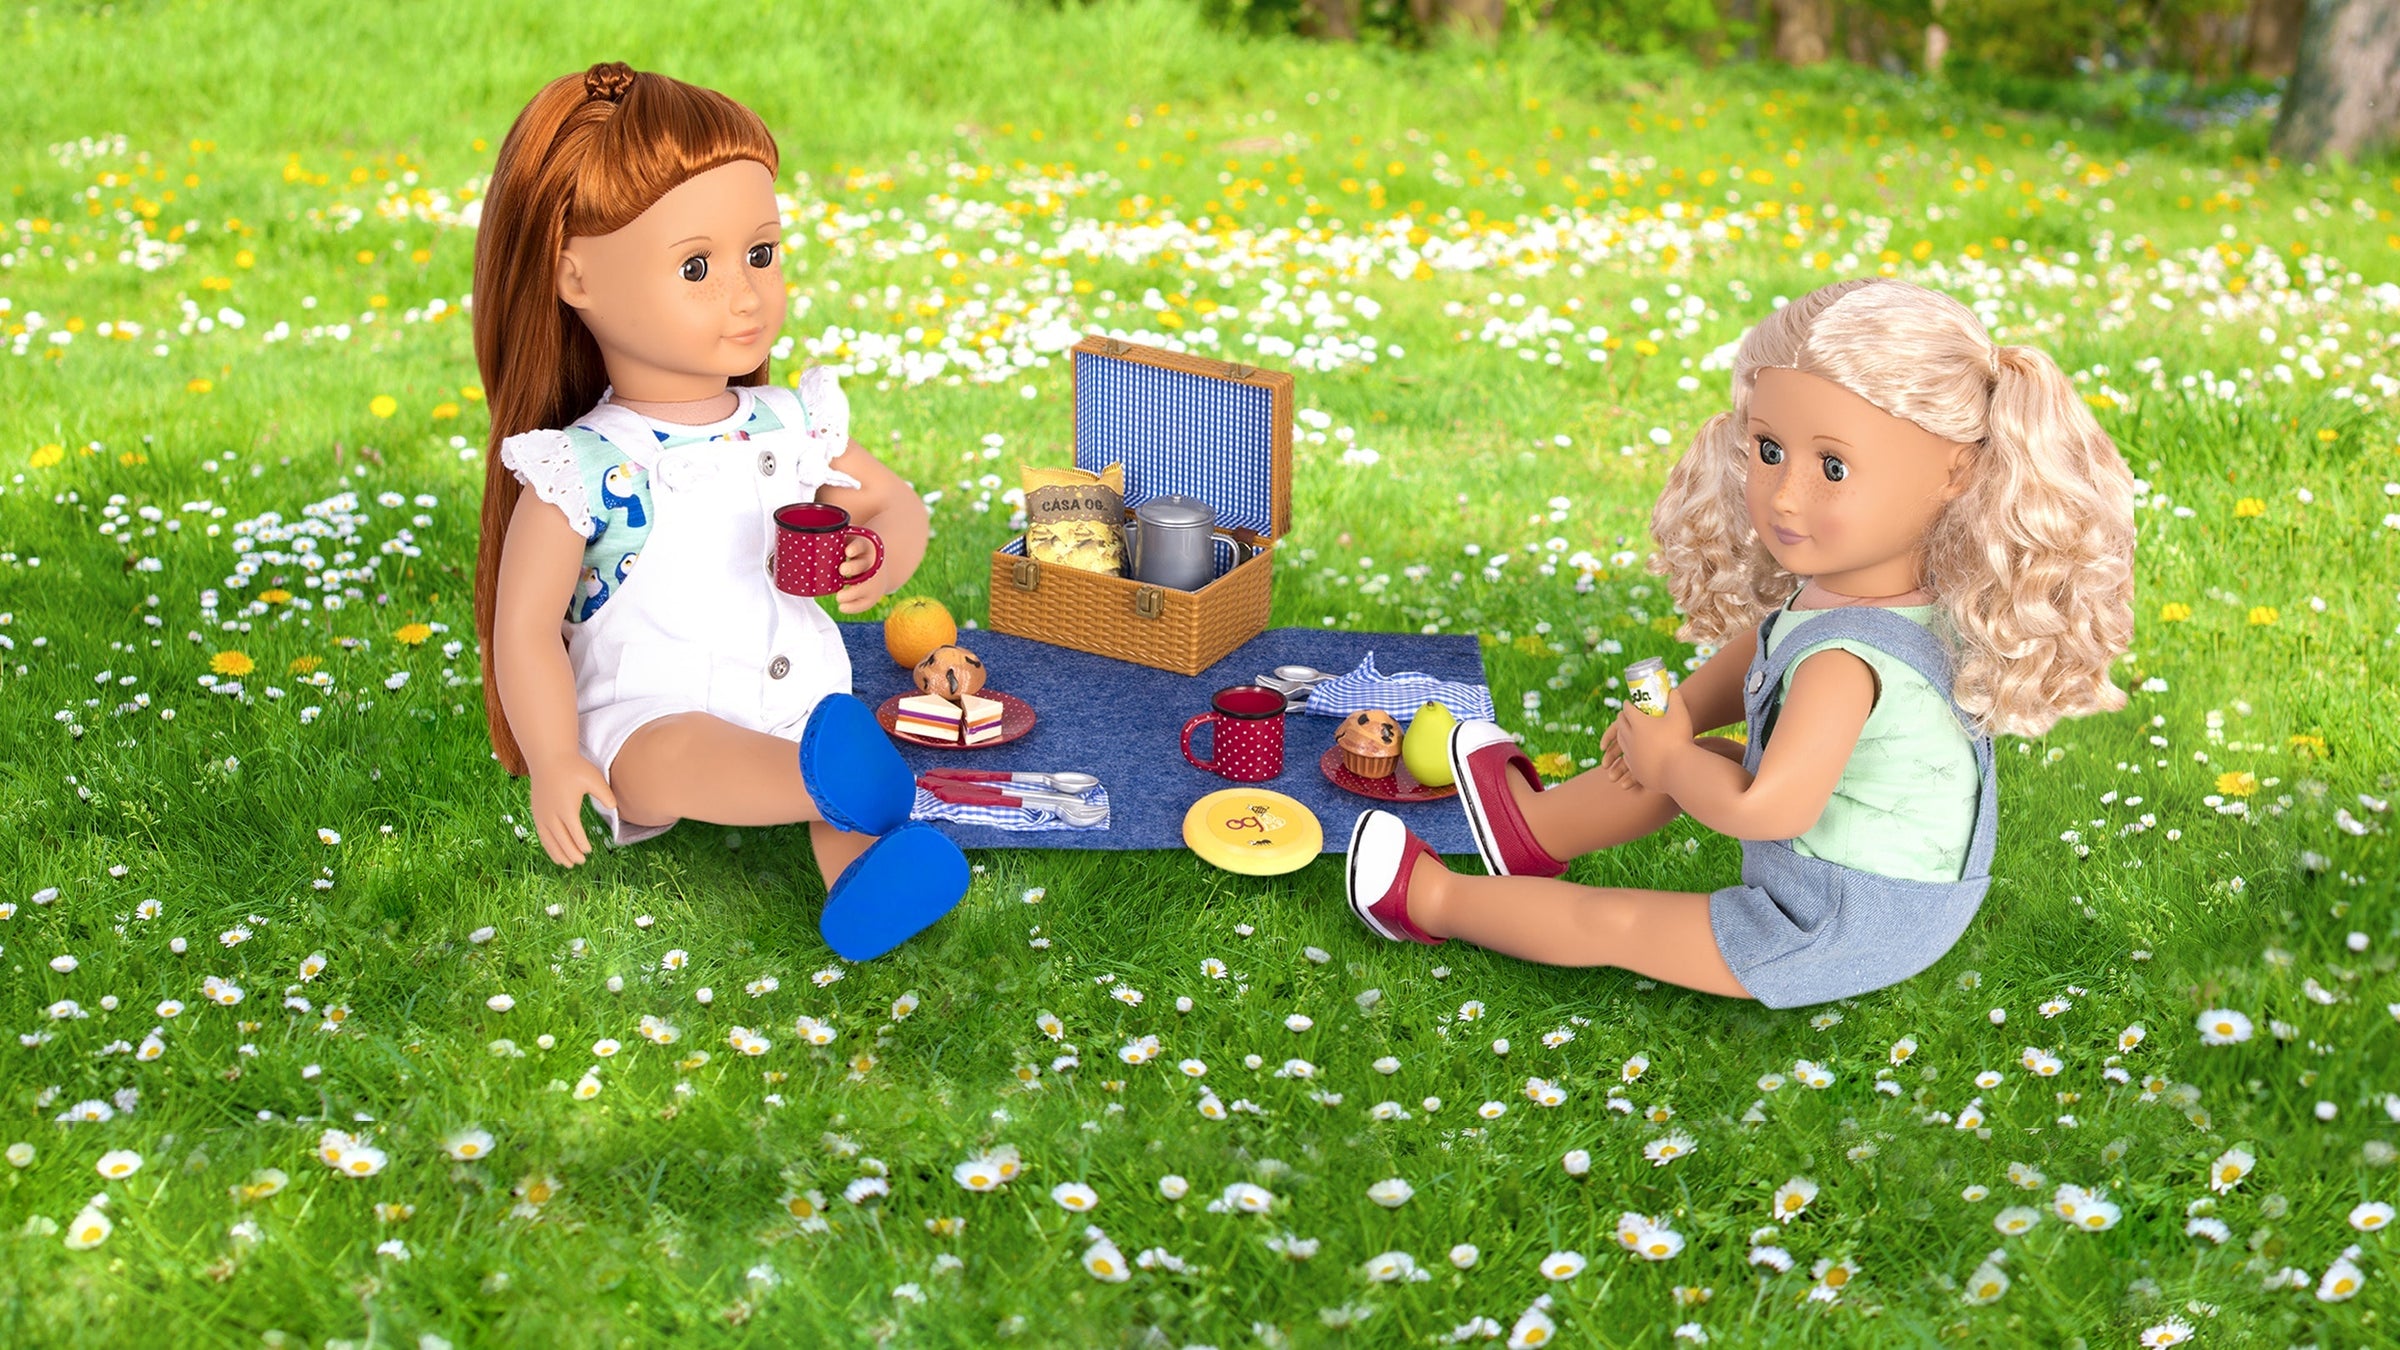 Food - Chef & Baking Dolls - Food Accessories & Playsets for OG Dolls - Our Generation